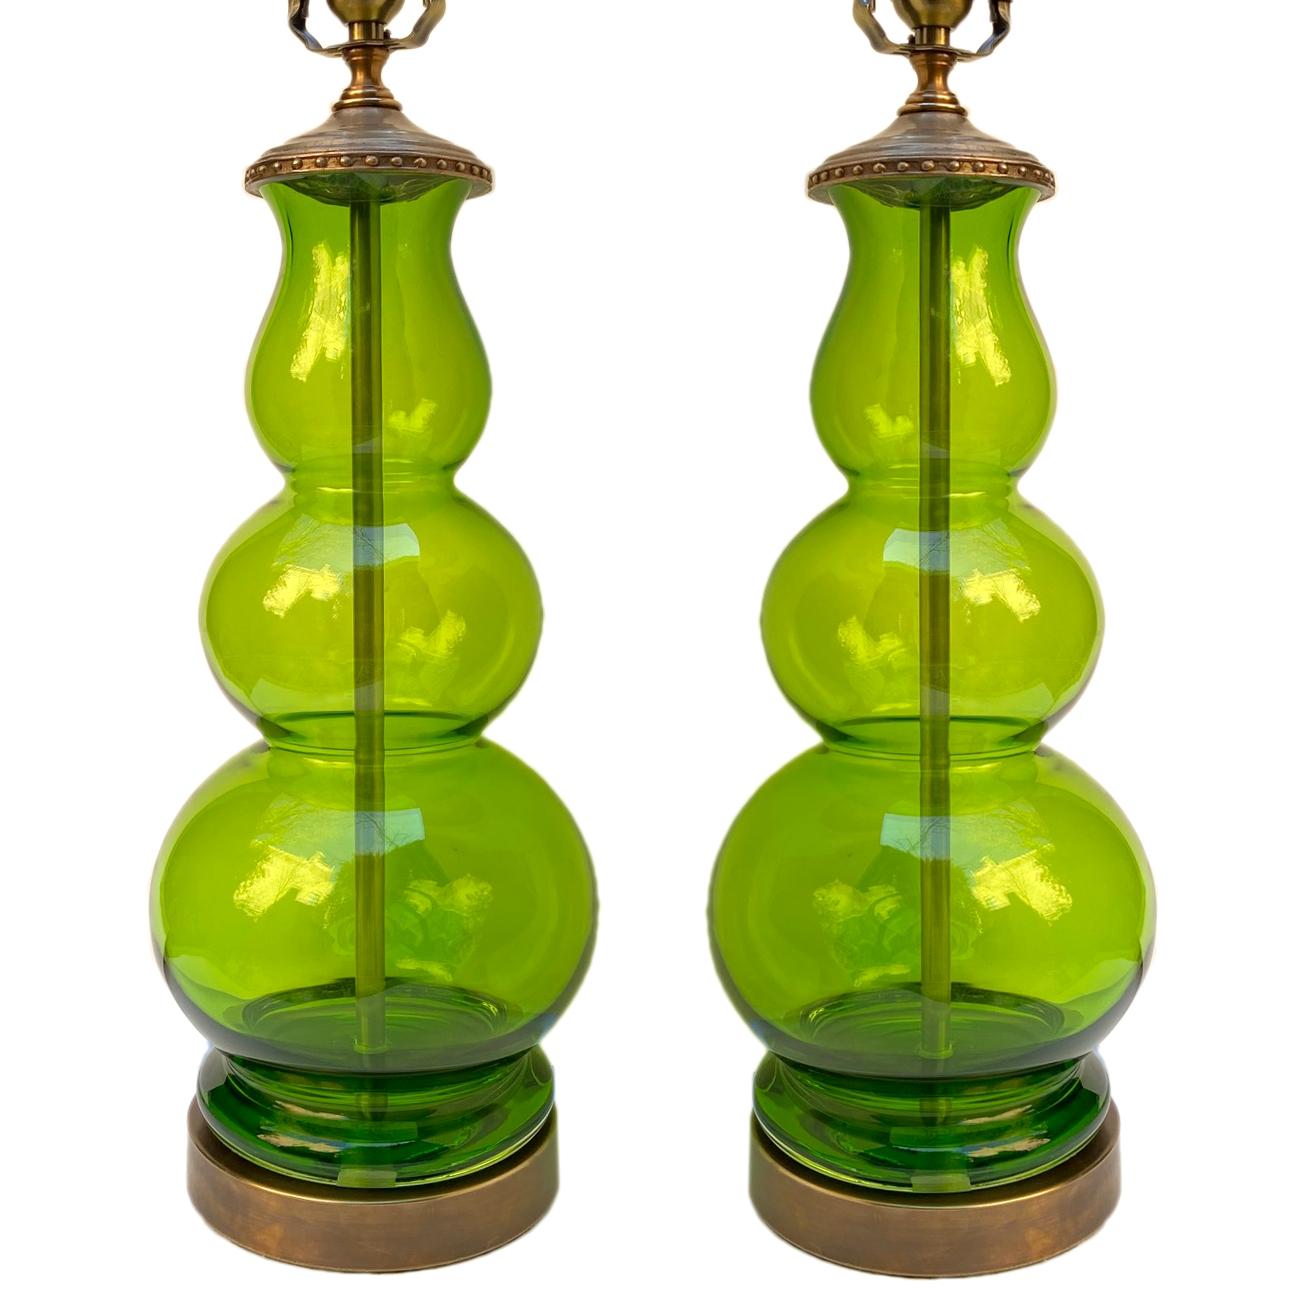 A pair of circa 1950s Italian green blown glass porcelain lamps.

Measurements:
Height of body 18”
Diameter at widest 6”.